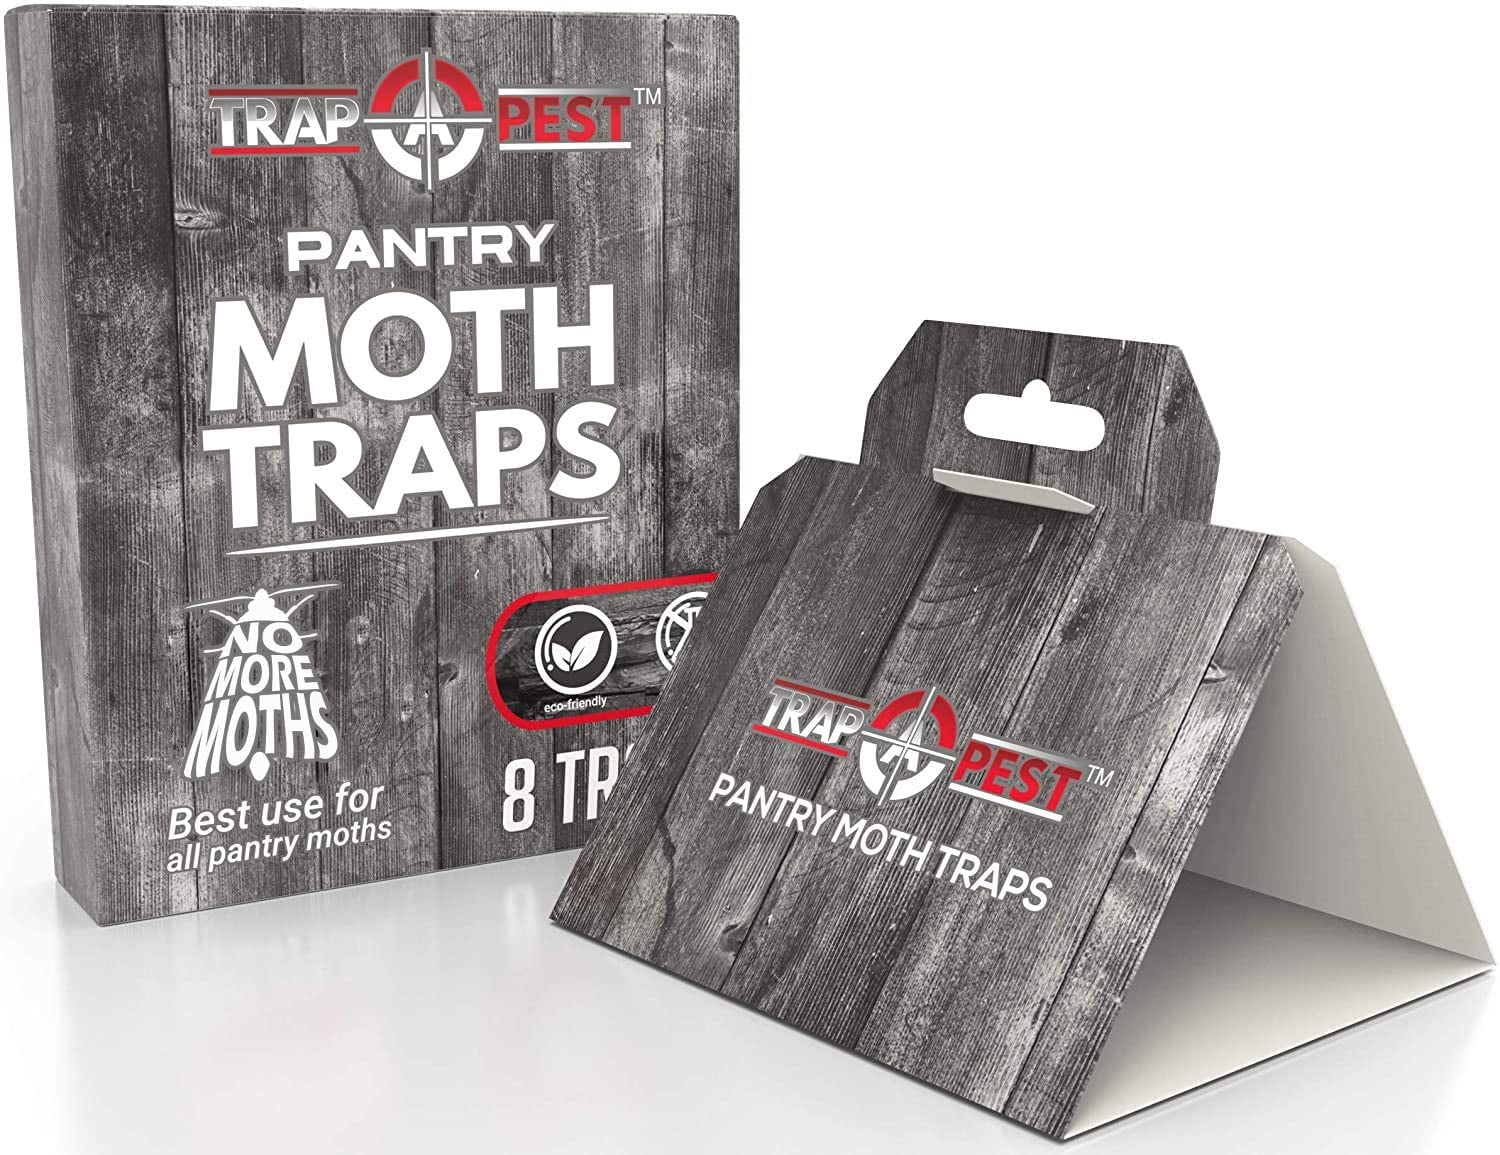 Trap It! Pantry Moth Traps, 10 Pack Sticky Glue Trap Indoor with Pheromones to Attract and Kill Grain Flour Seed Meal Moths, Non-Toxic Pantry Pest